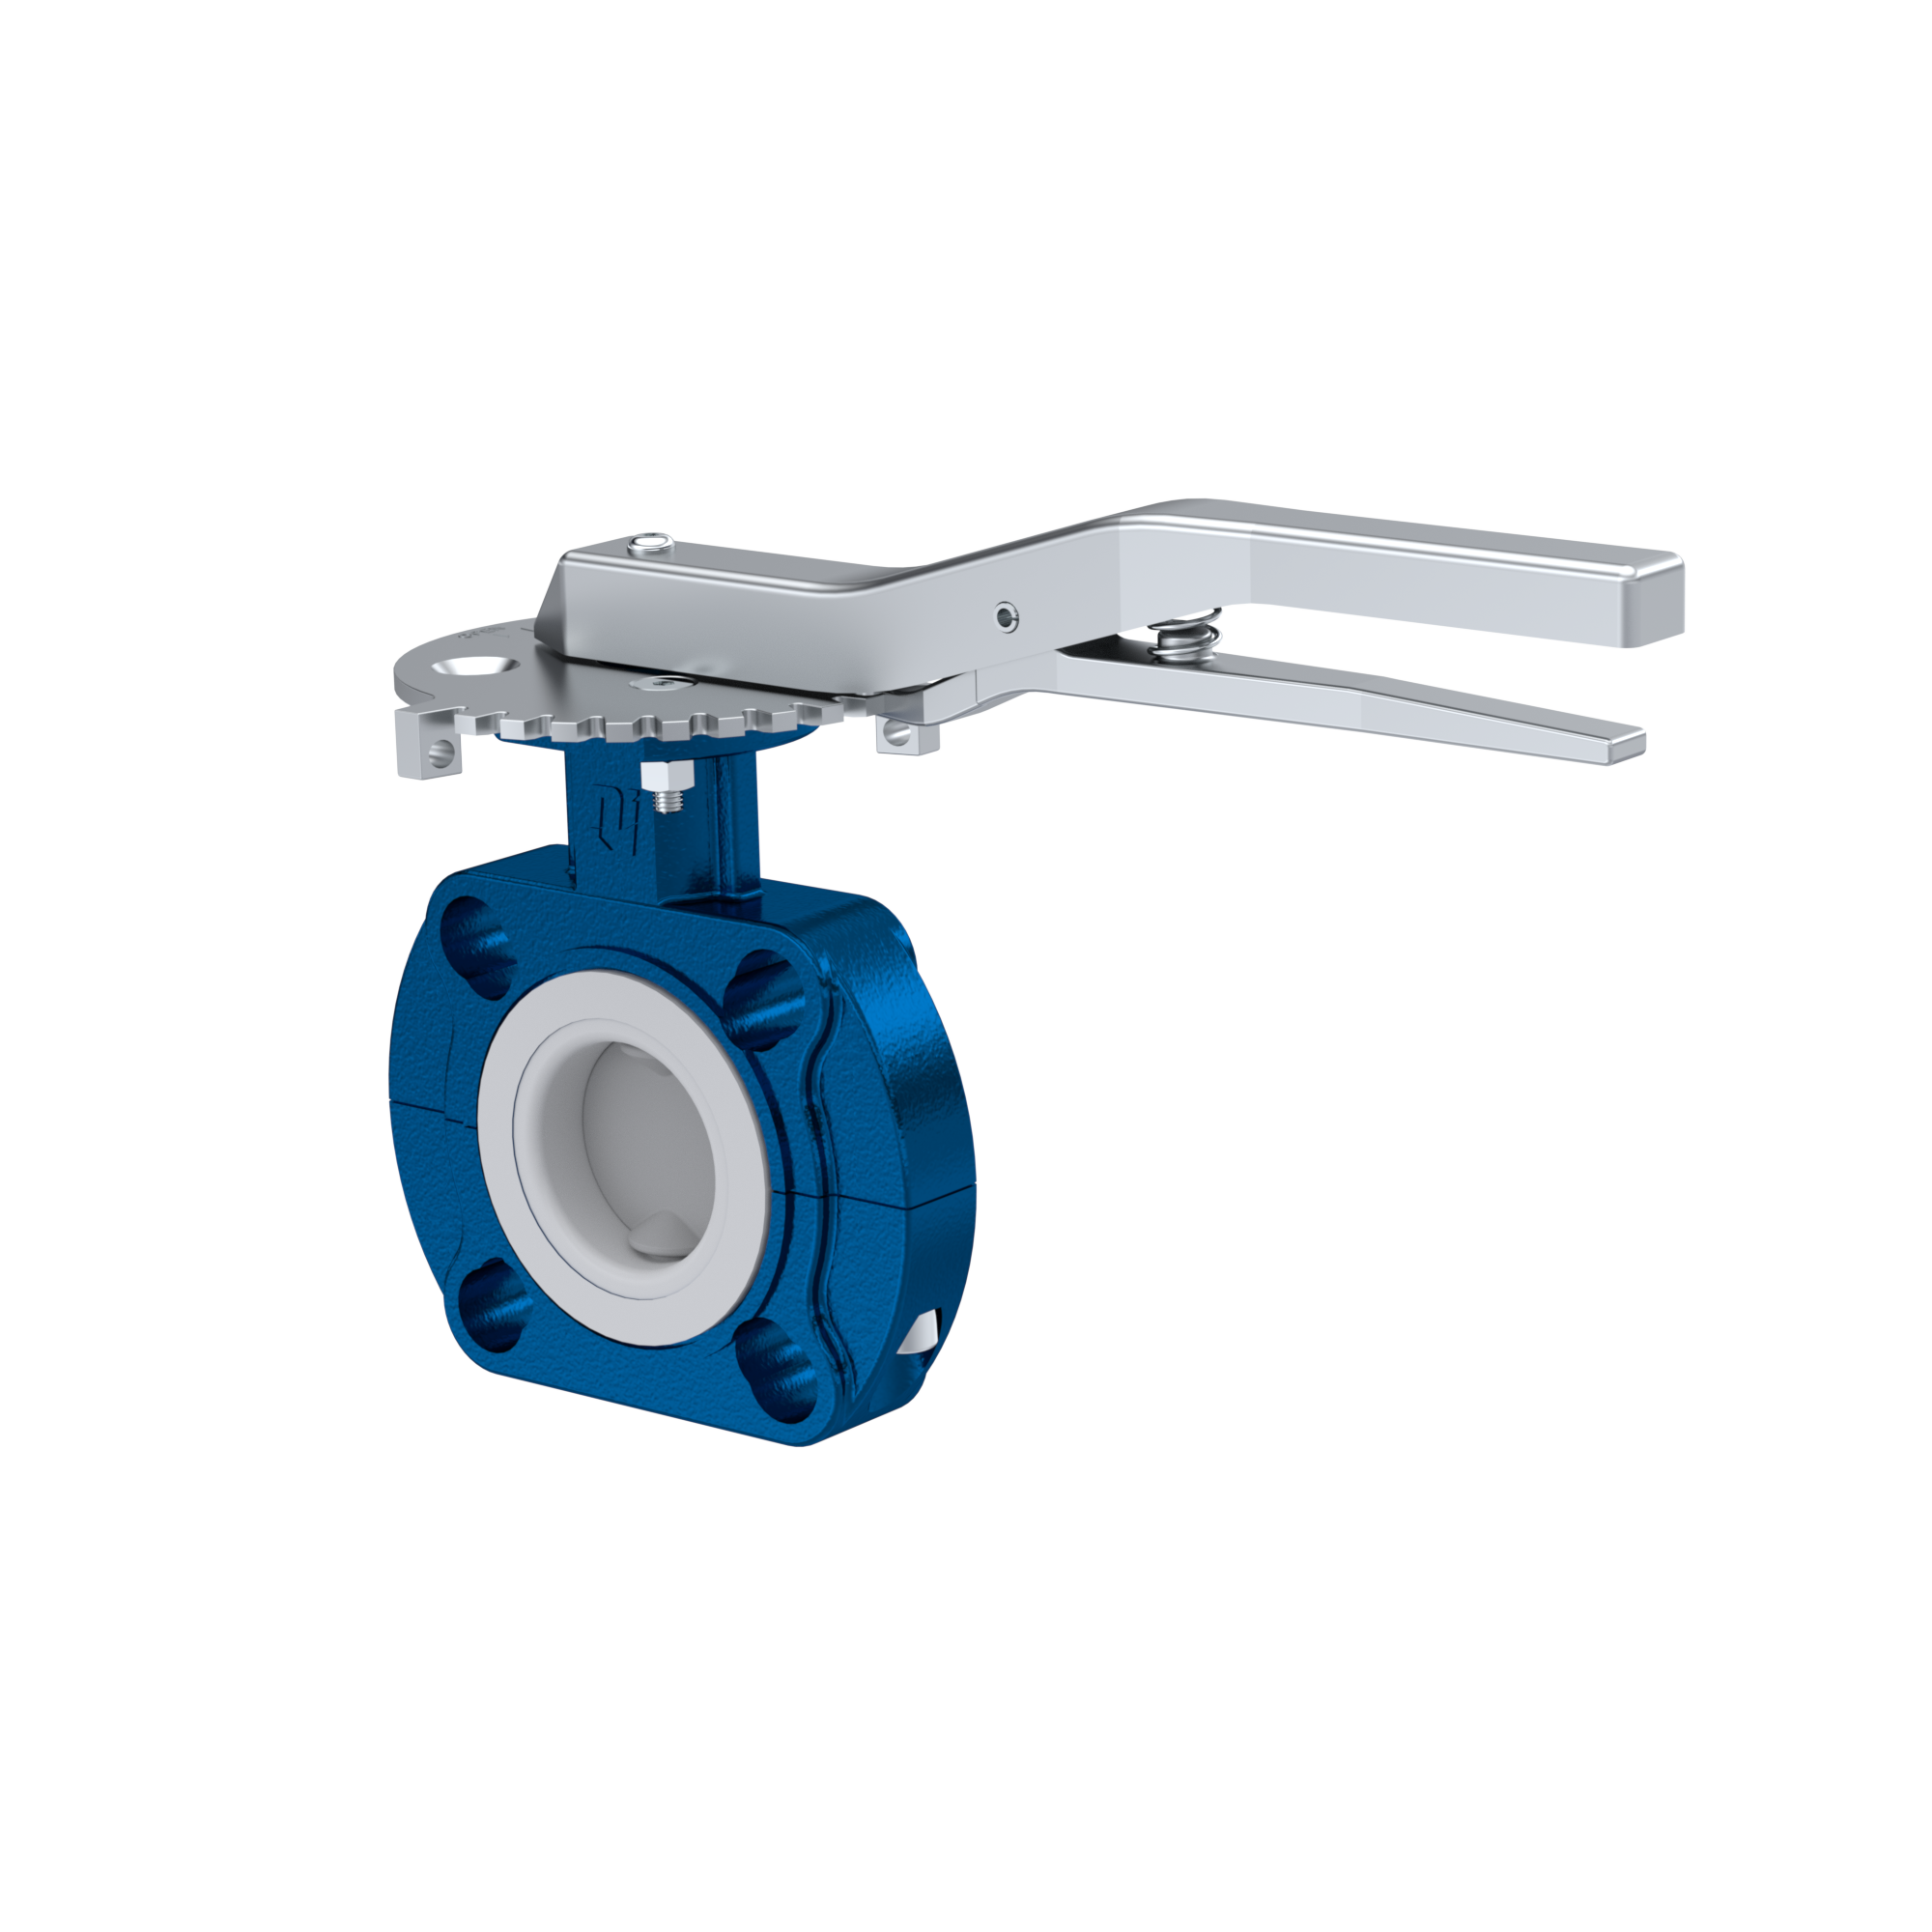 Butterfly-valve PTFE AK09 DN40 ANSI150 lever silicone insert